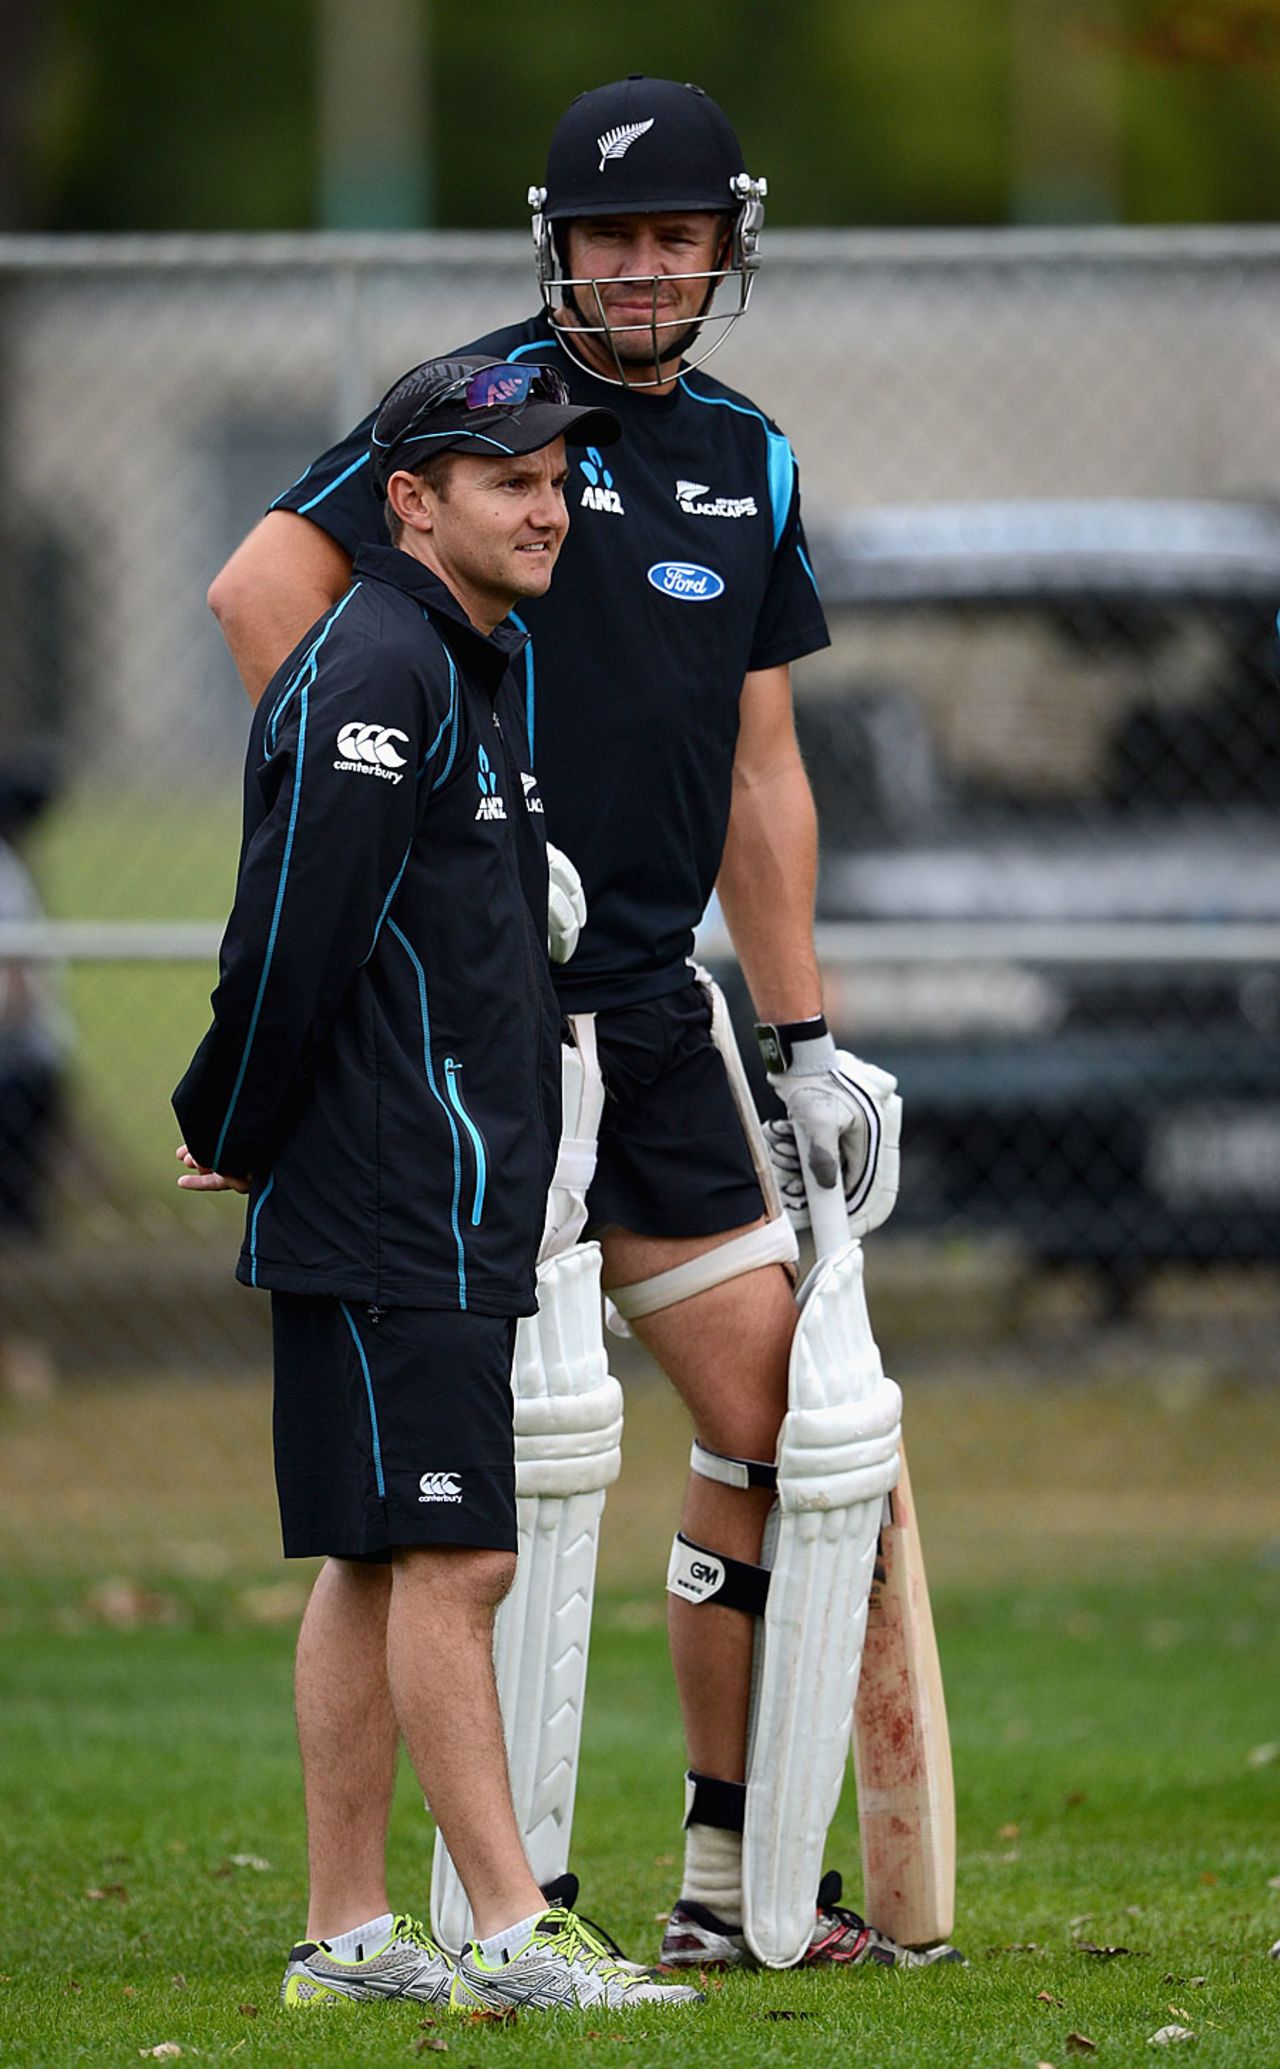 Peter Fulton has a chat with Mike Hesson, Dunedin, March 5, 2013